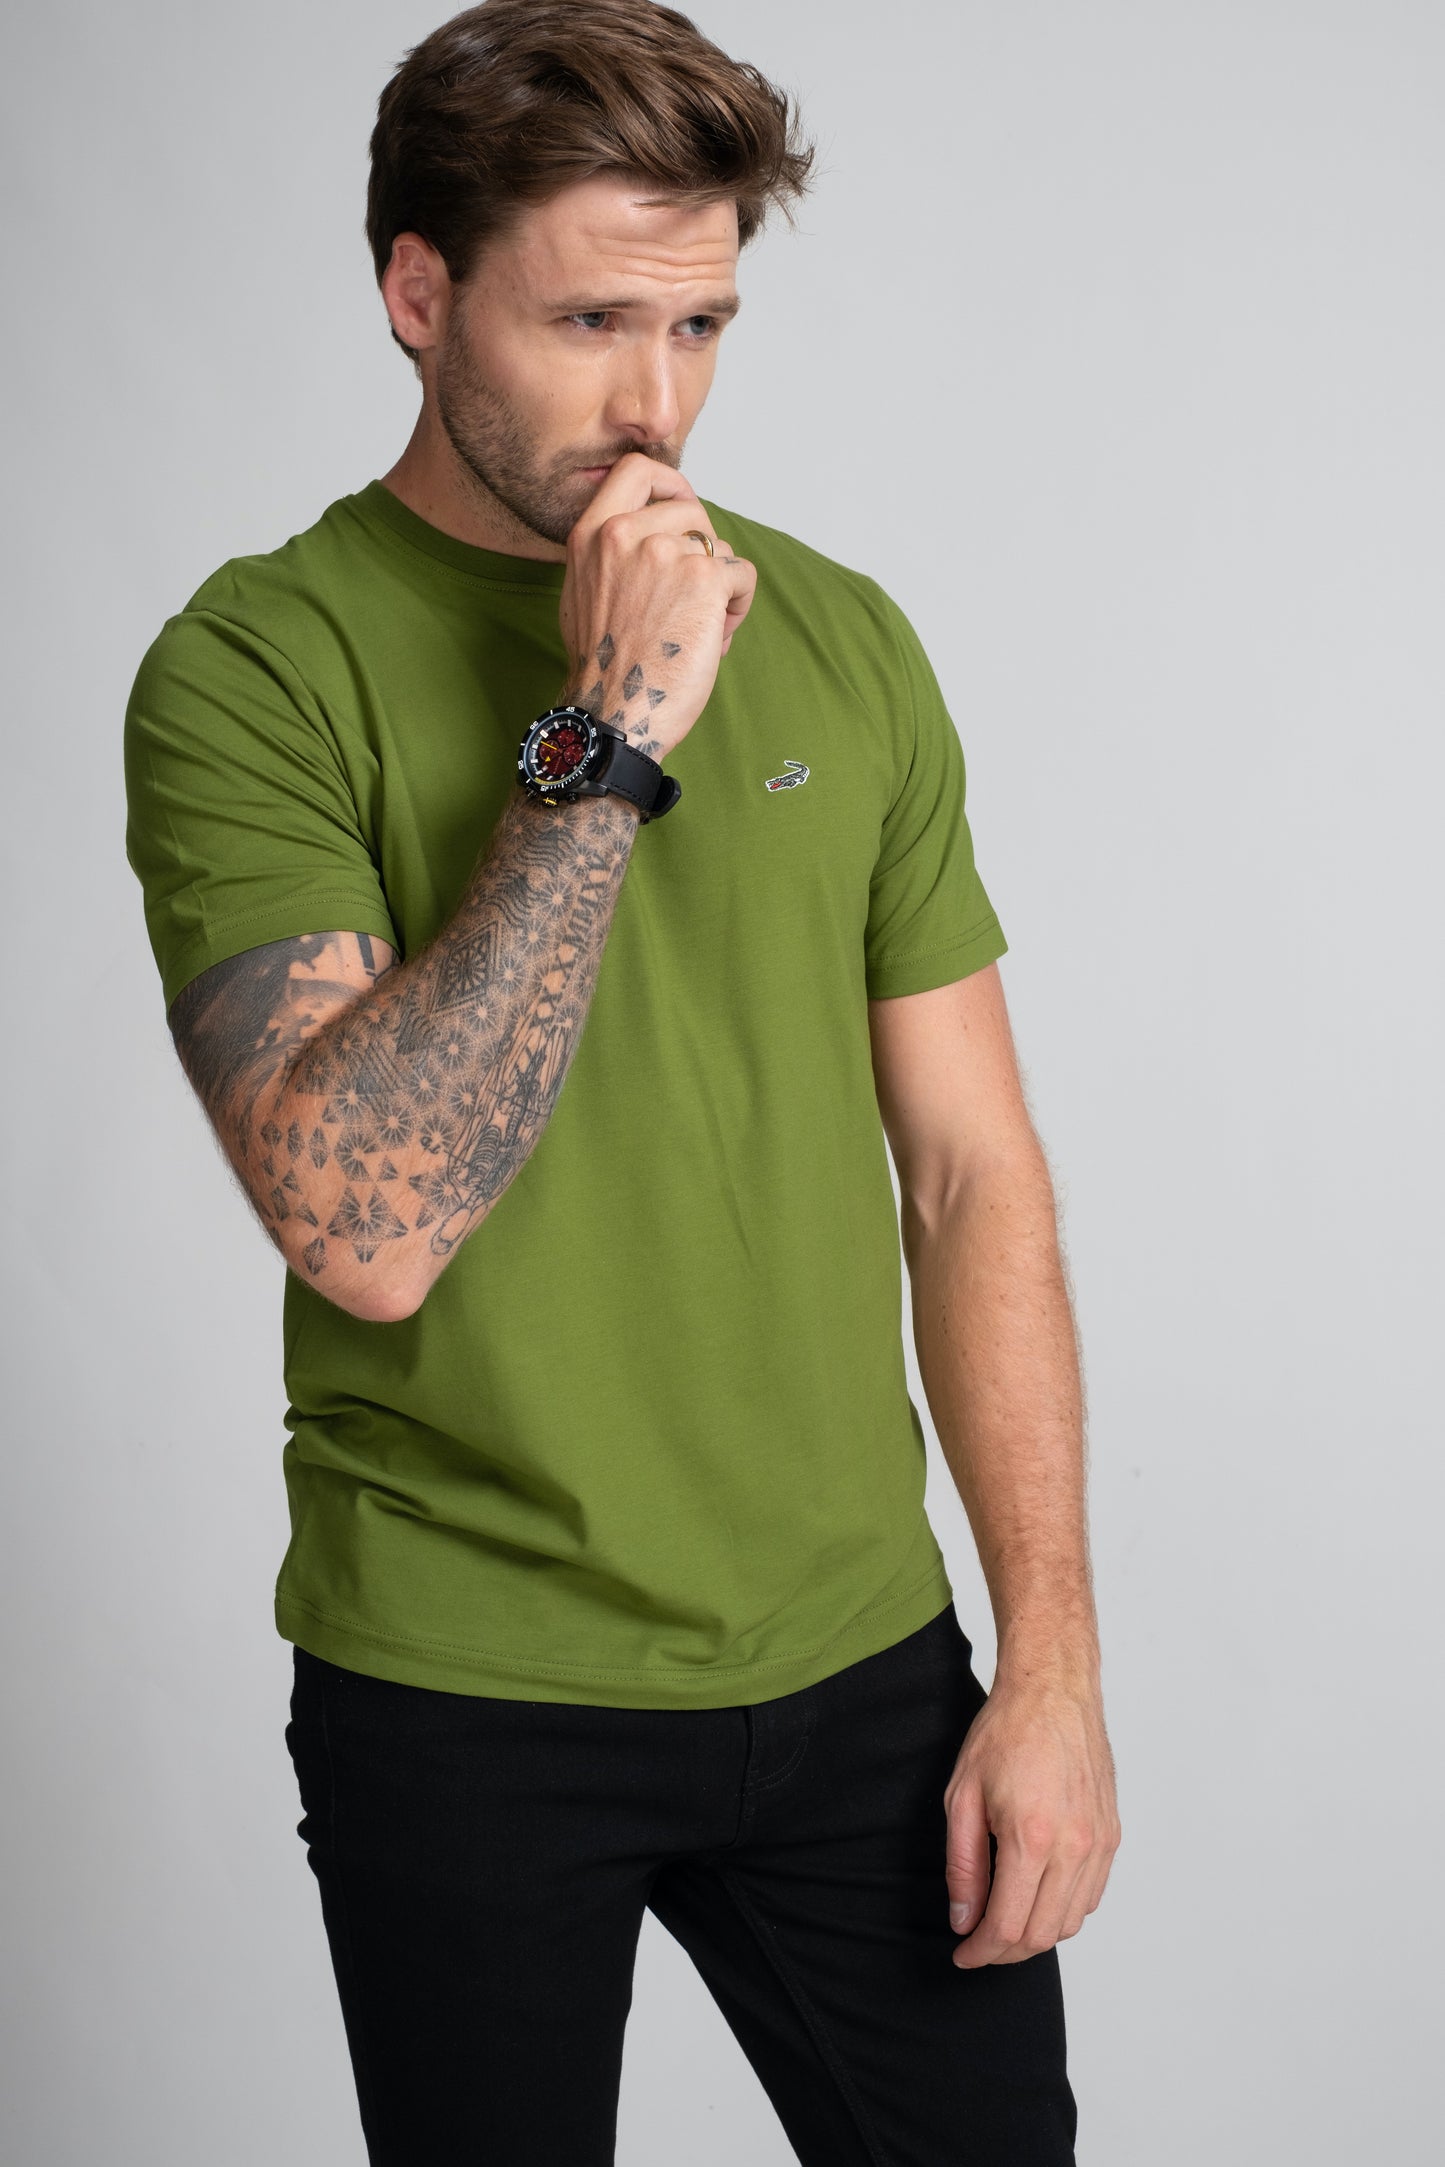 Classic Fit Short sleeves-CasualCrew Neck - Grass Hopper